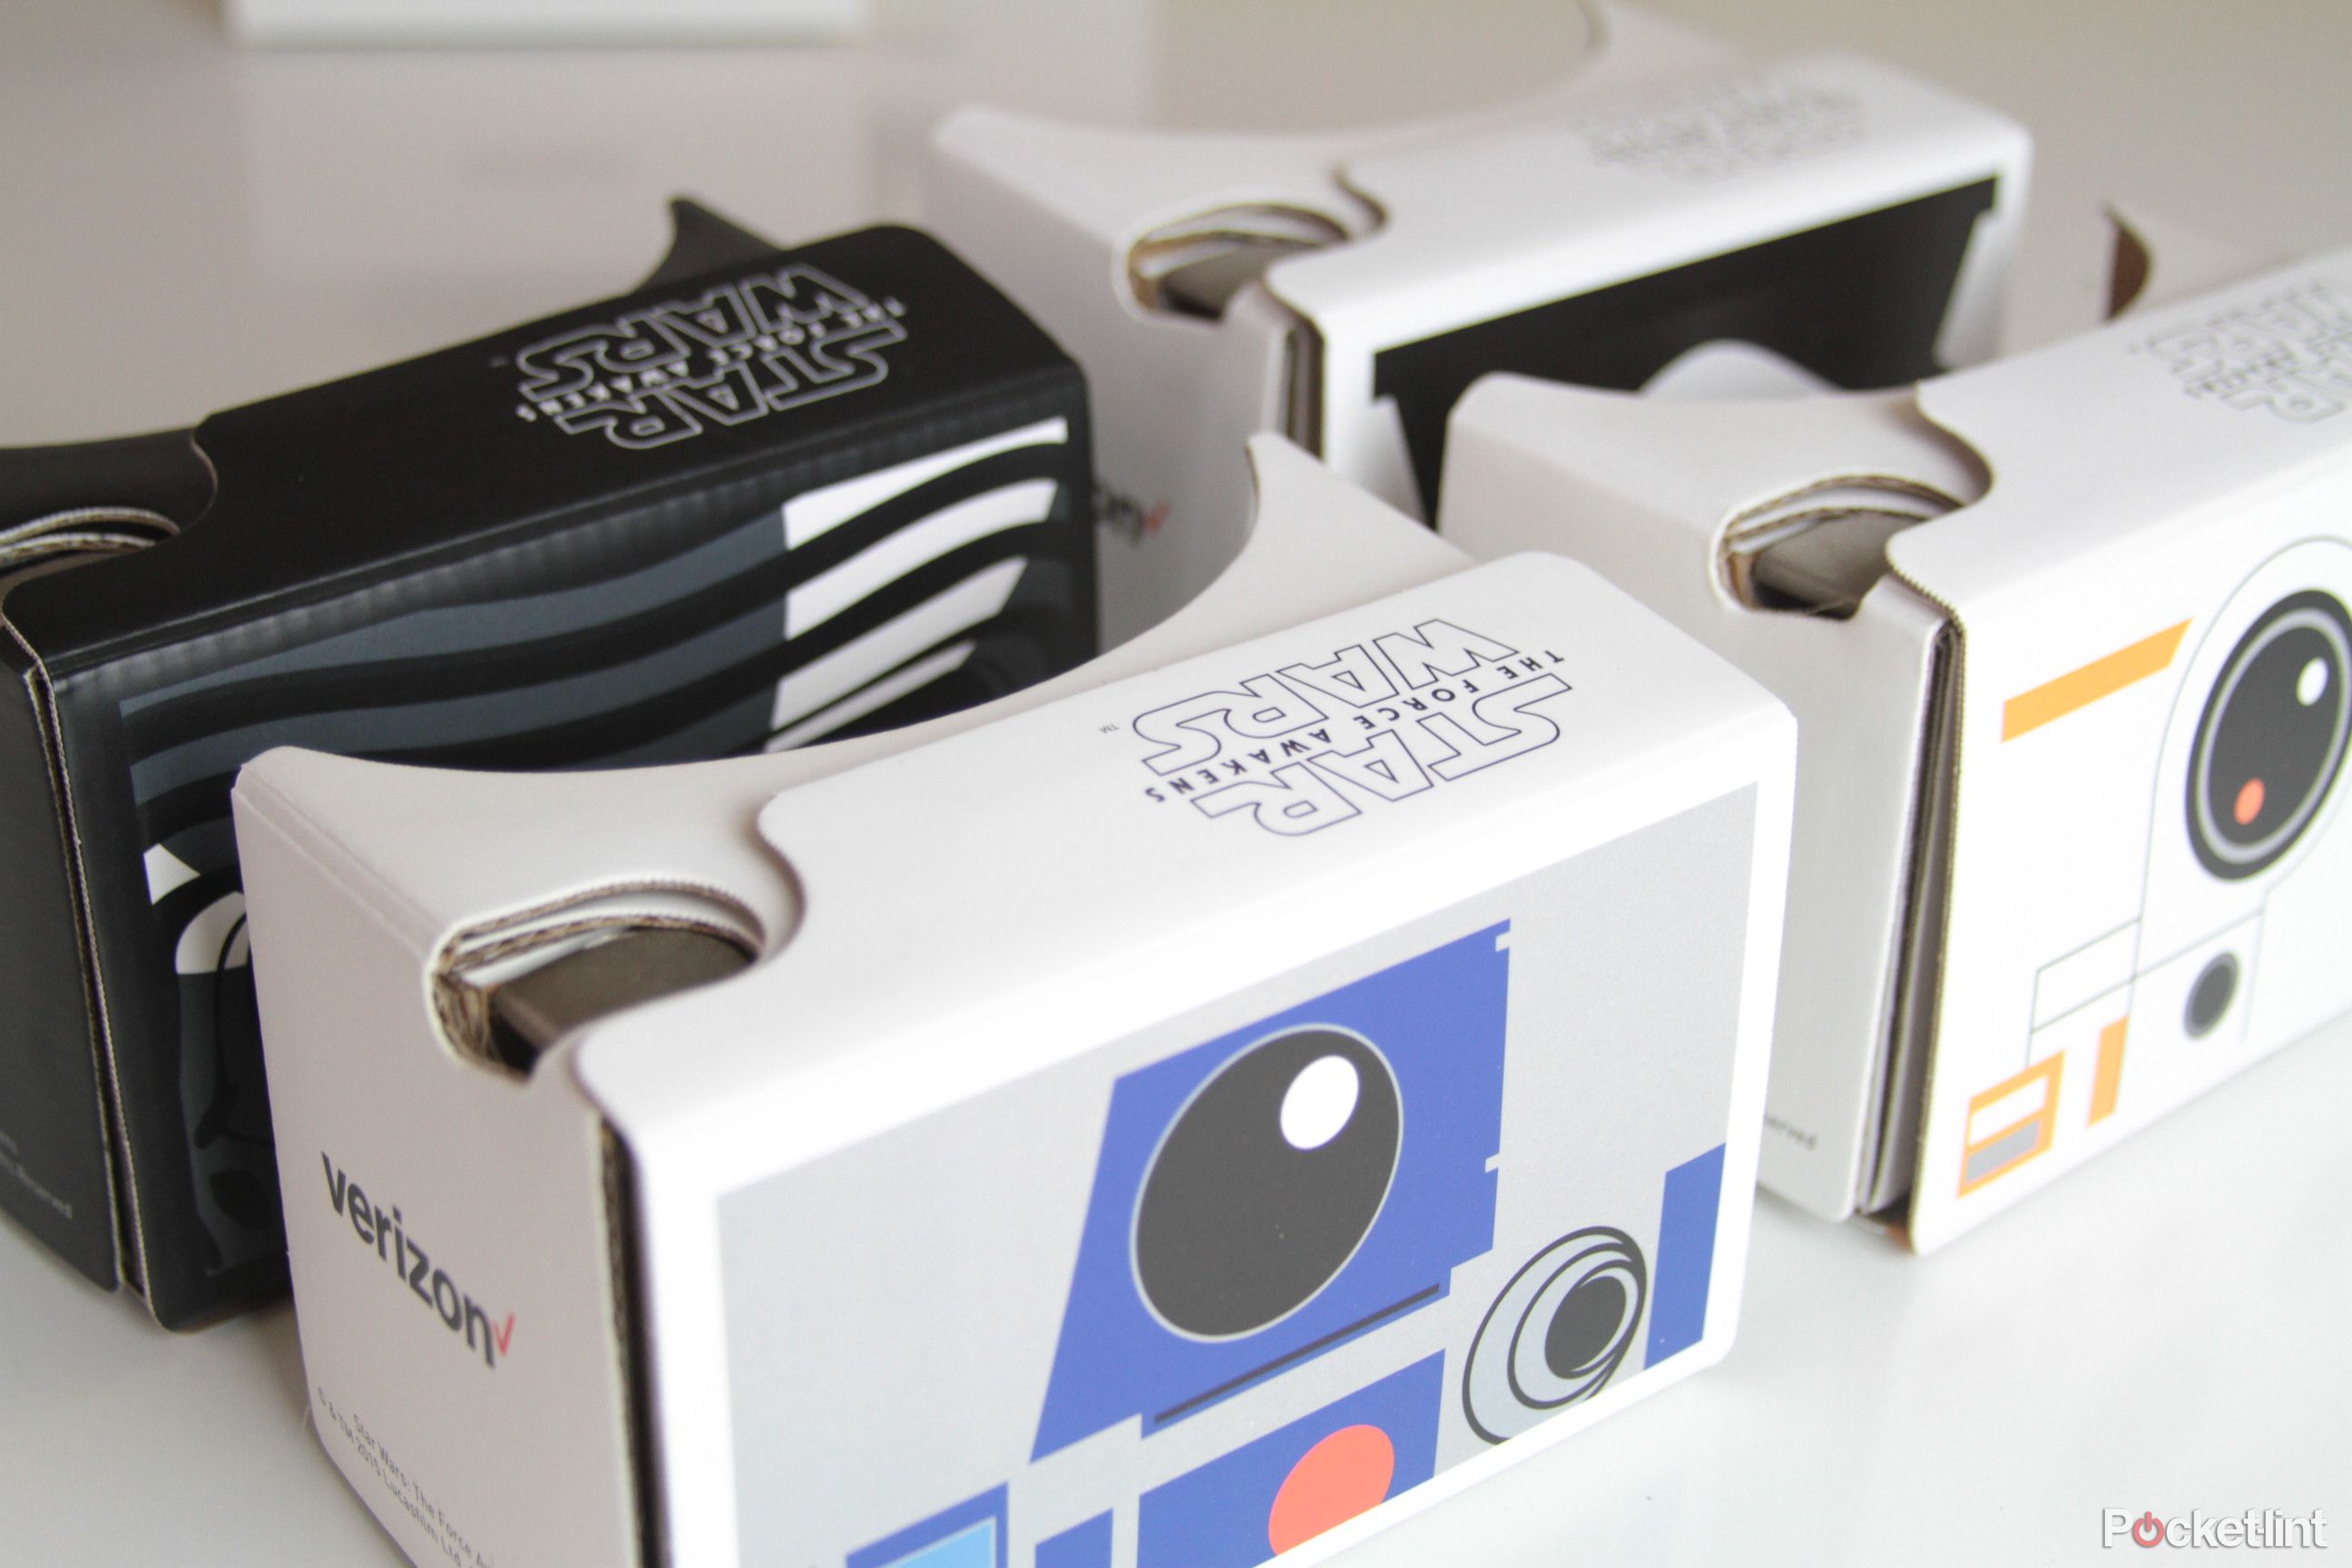 here are the star wars cardboard headsets image 3